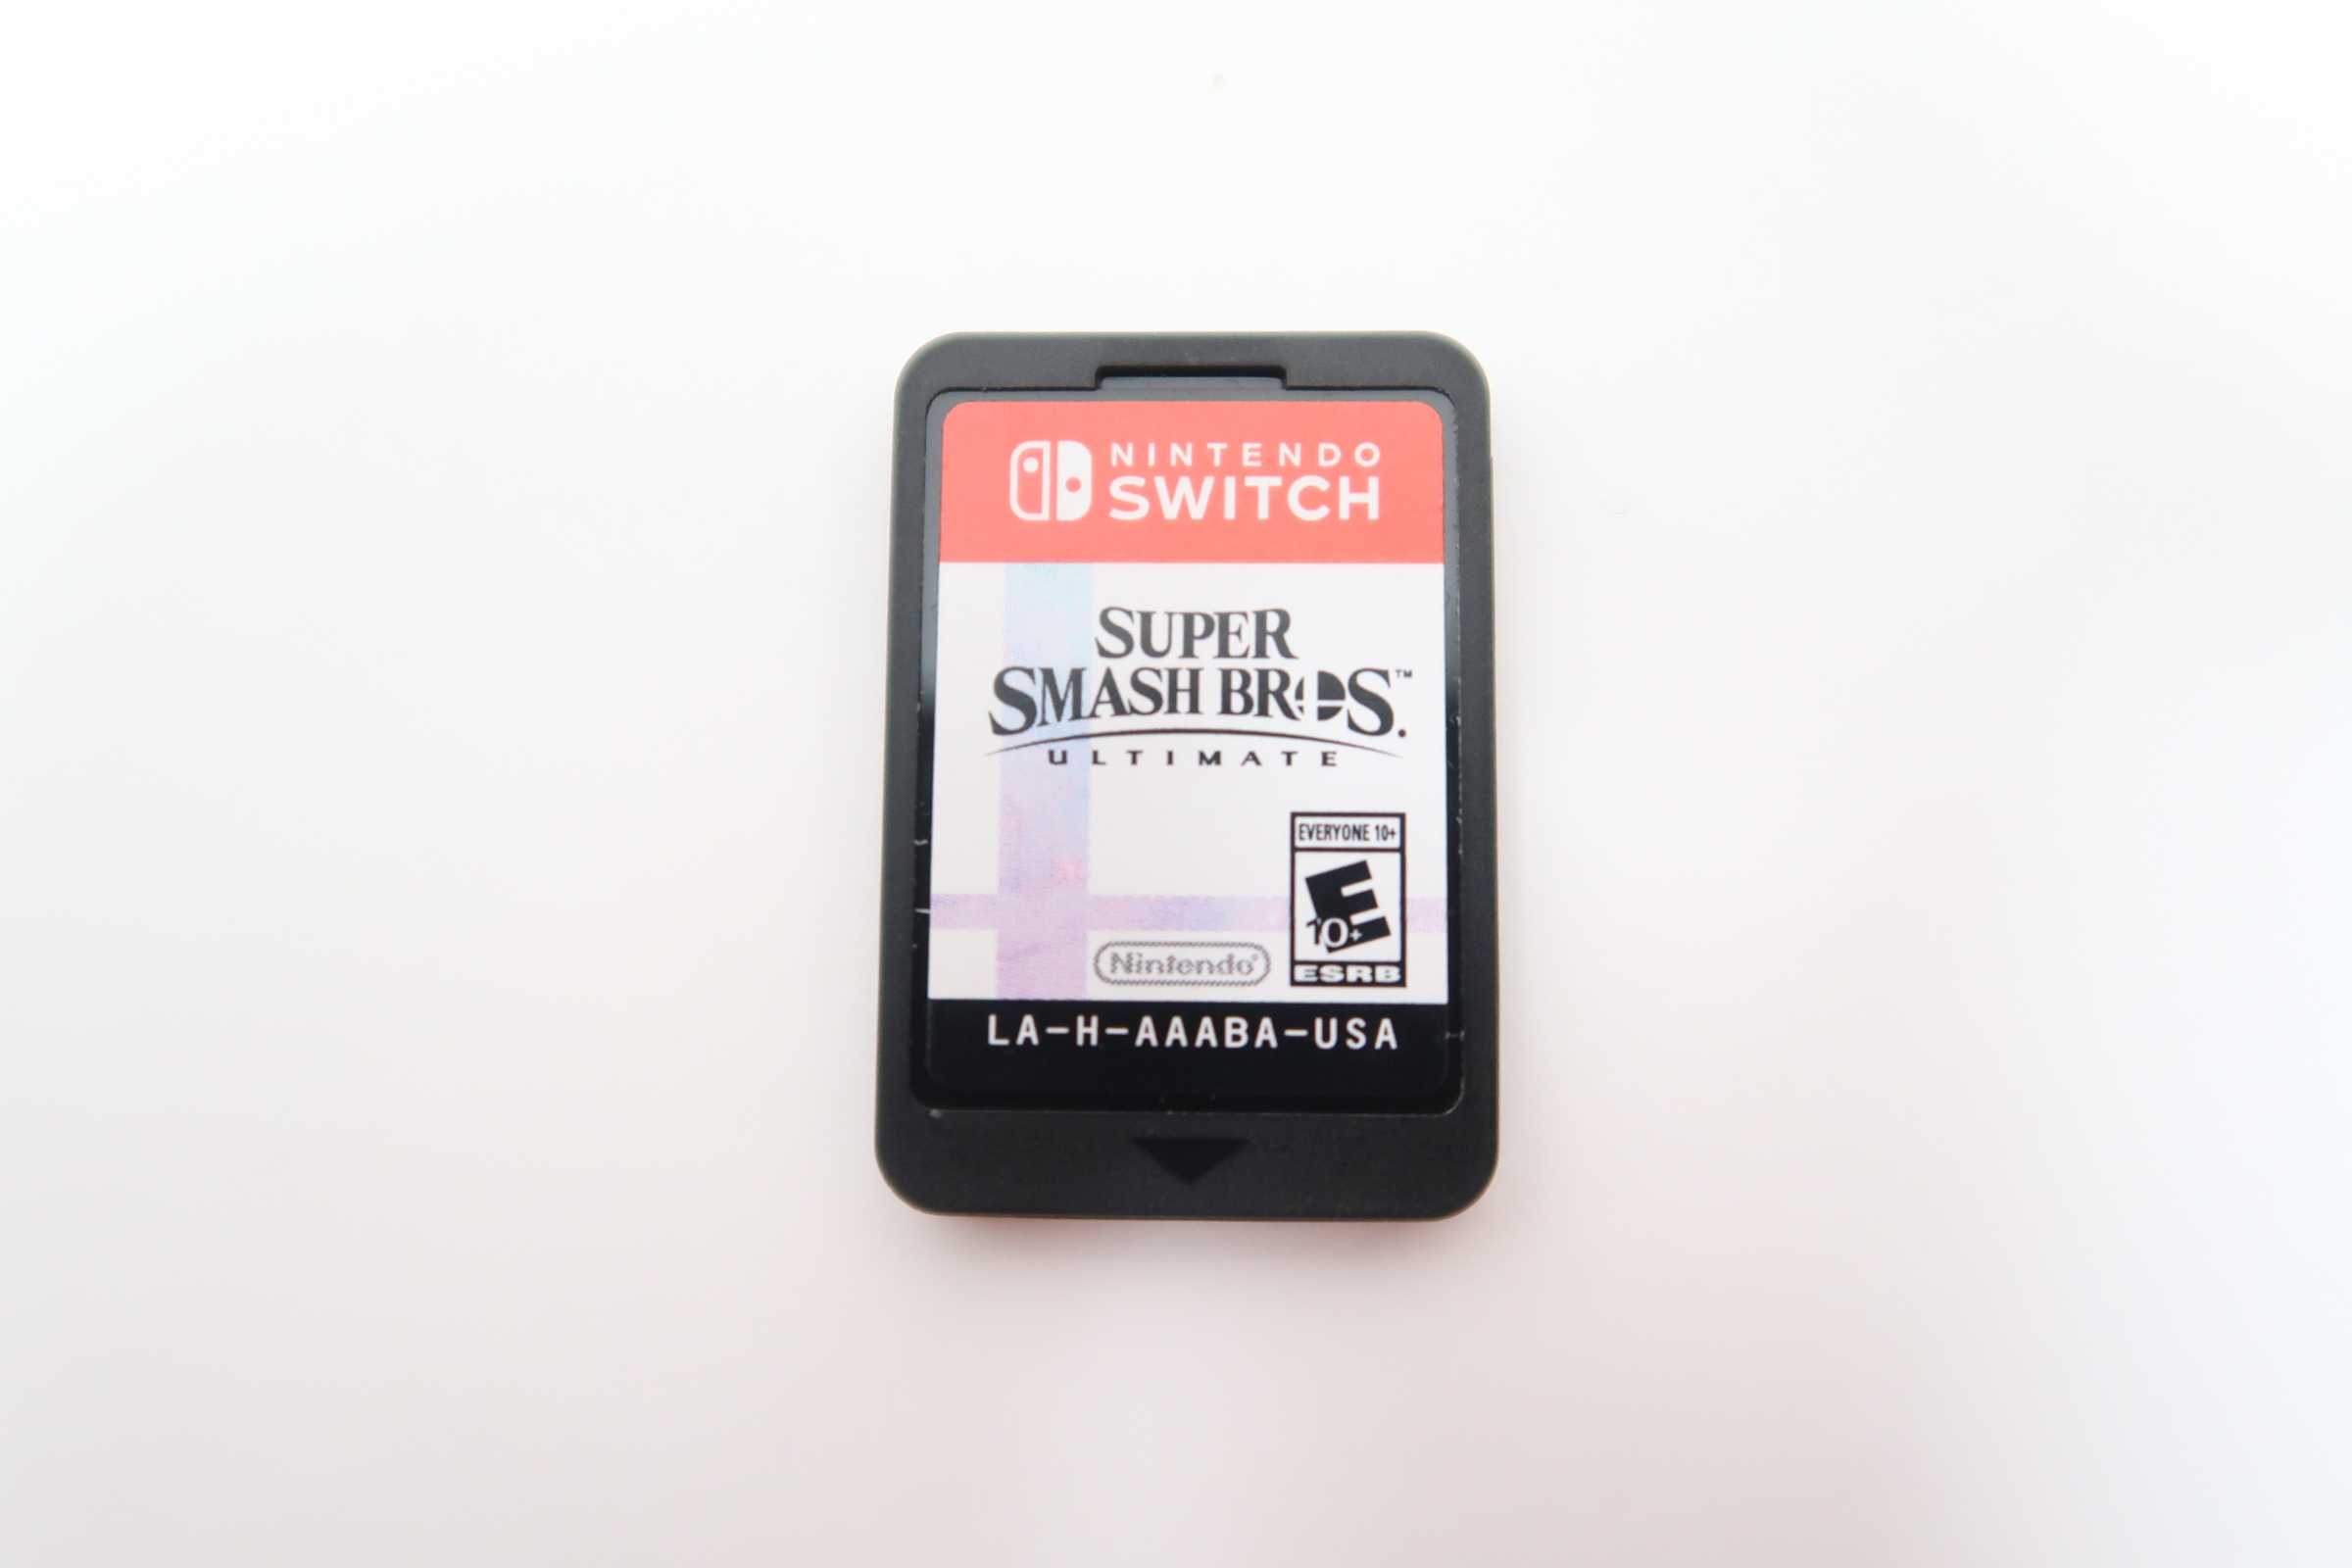 Super Smash Bros. Ultimate Nintendo Switch Game Deals 100% Official  Original Physical Game Card for